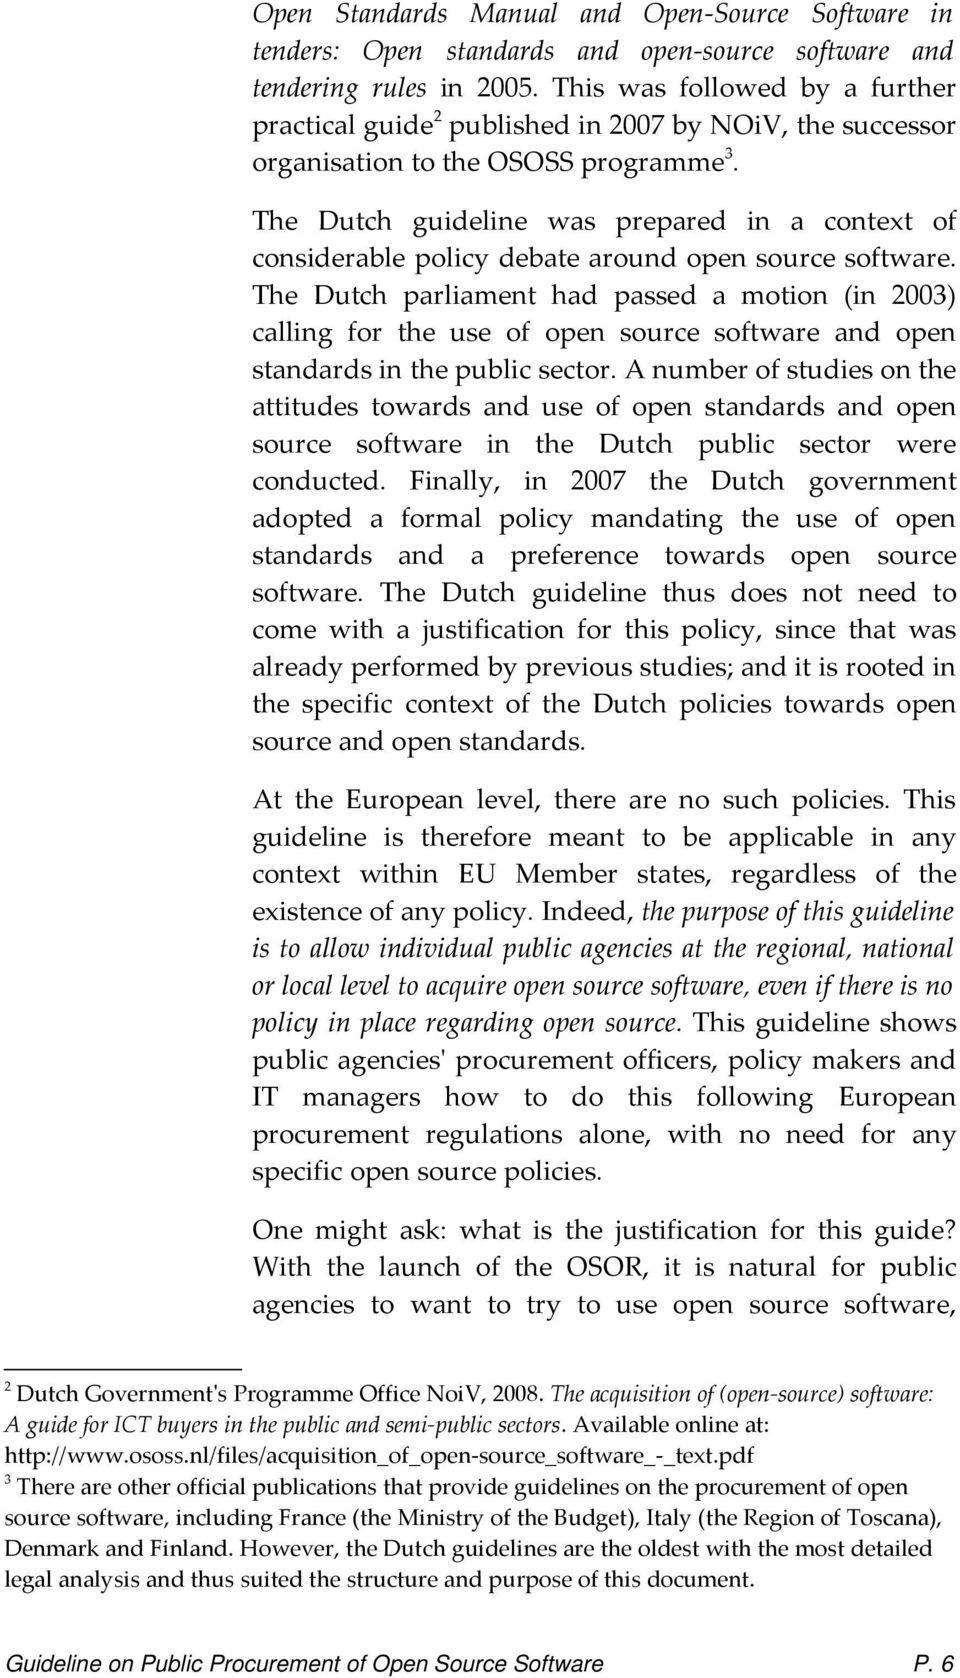 The Dutch guideline was prepared in a context of considerable policy debate around open source software.